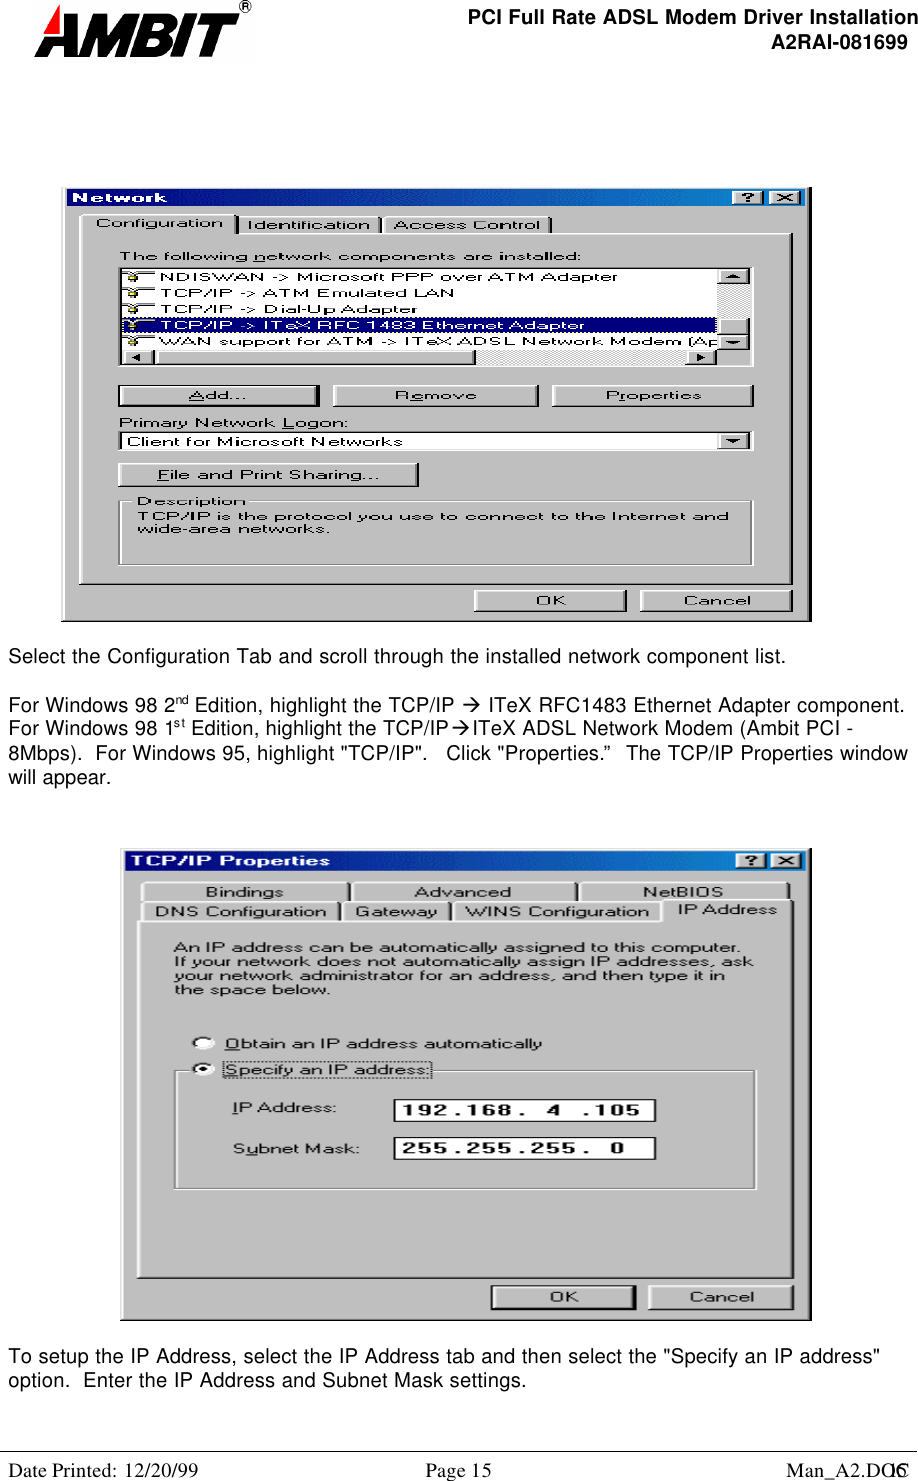 PCI Full Rate ADSL Modem Driver InstallationA2RAI-081699Date Printed: 12/20/99 Page 15 Man_A2.DOC15Select the Configuration Tab and scroll through the installed network component list.For Windows 98 2nd Edition, highlight the TCP/IP à ITeX RFC1483 Ethernet Adapter component.For Windows 98 1st Edition, highlight the TCP/IPàITeX ADSL Network Modem (Ambit PCI -8Mbps).  For Windows 95, highlight &quot;TCP/IP&quot;.   Click &quot;Properties.”  The TCP/IP Properties windowwill appear.To setup the IP Address, select the IP Address tab and then select the &quot;Specify an IP address&quot;option.  Enter the IP Address and Subnet Mask settings.